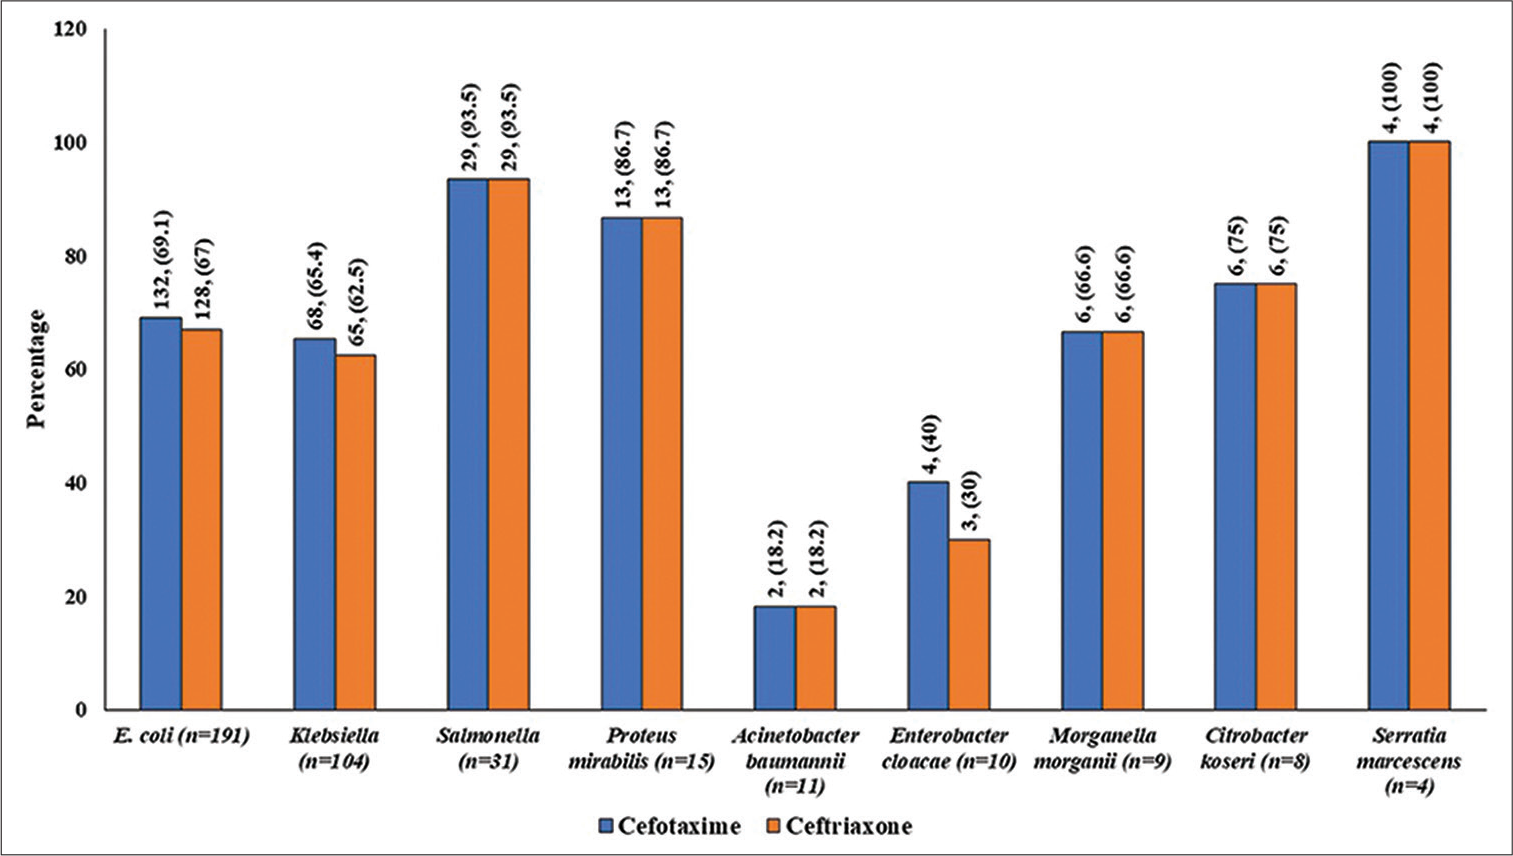 Proportion of samples sensitive for cefotaxime versus ceftriaxone as per CLSI criteria based on MIC (values are in numbers, percentage). CLSI, clinical and Laboratory Standards Institute; MIC, minimum inhibitory concentration.